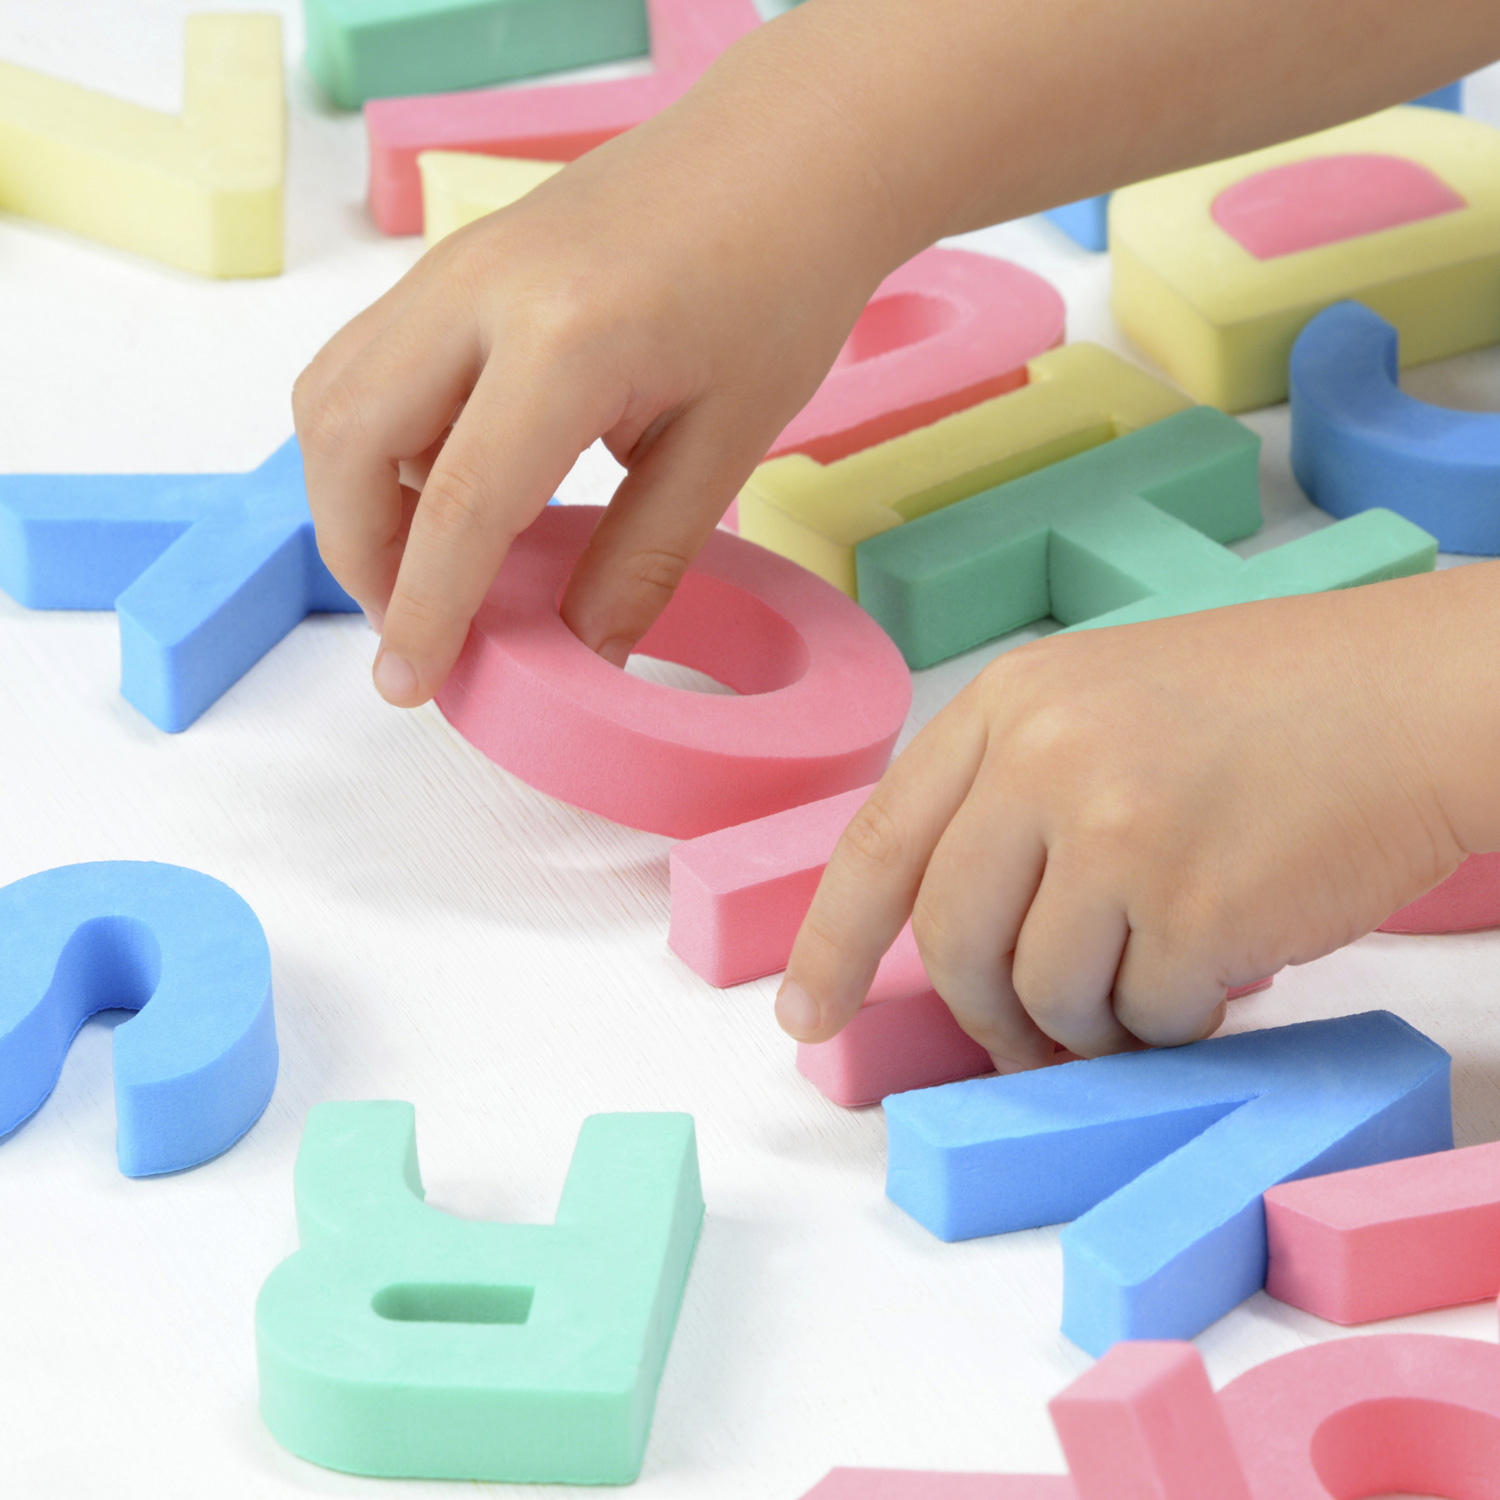 Help your toddler grow language skills with expert-developed activities.